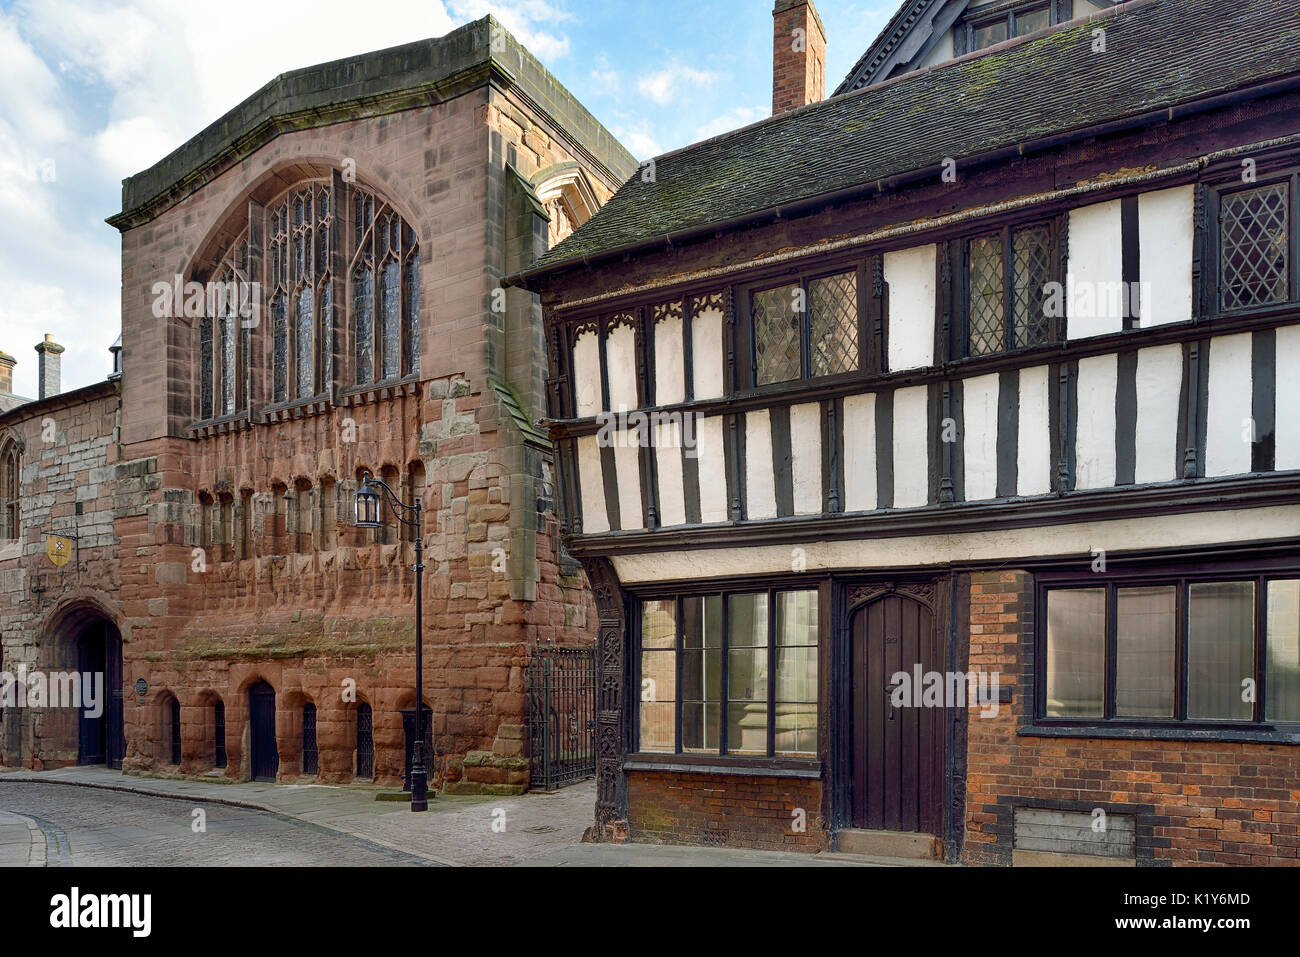 The Cottage & St Mary's Guildhall, Bayley Lane, Coventry Early 16th century grade II listed buildings Stock Photo